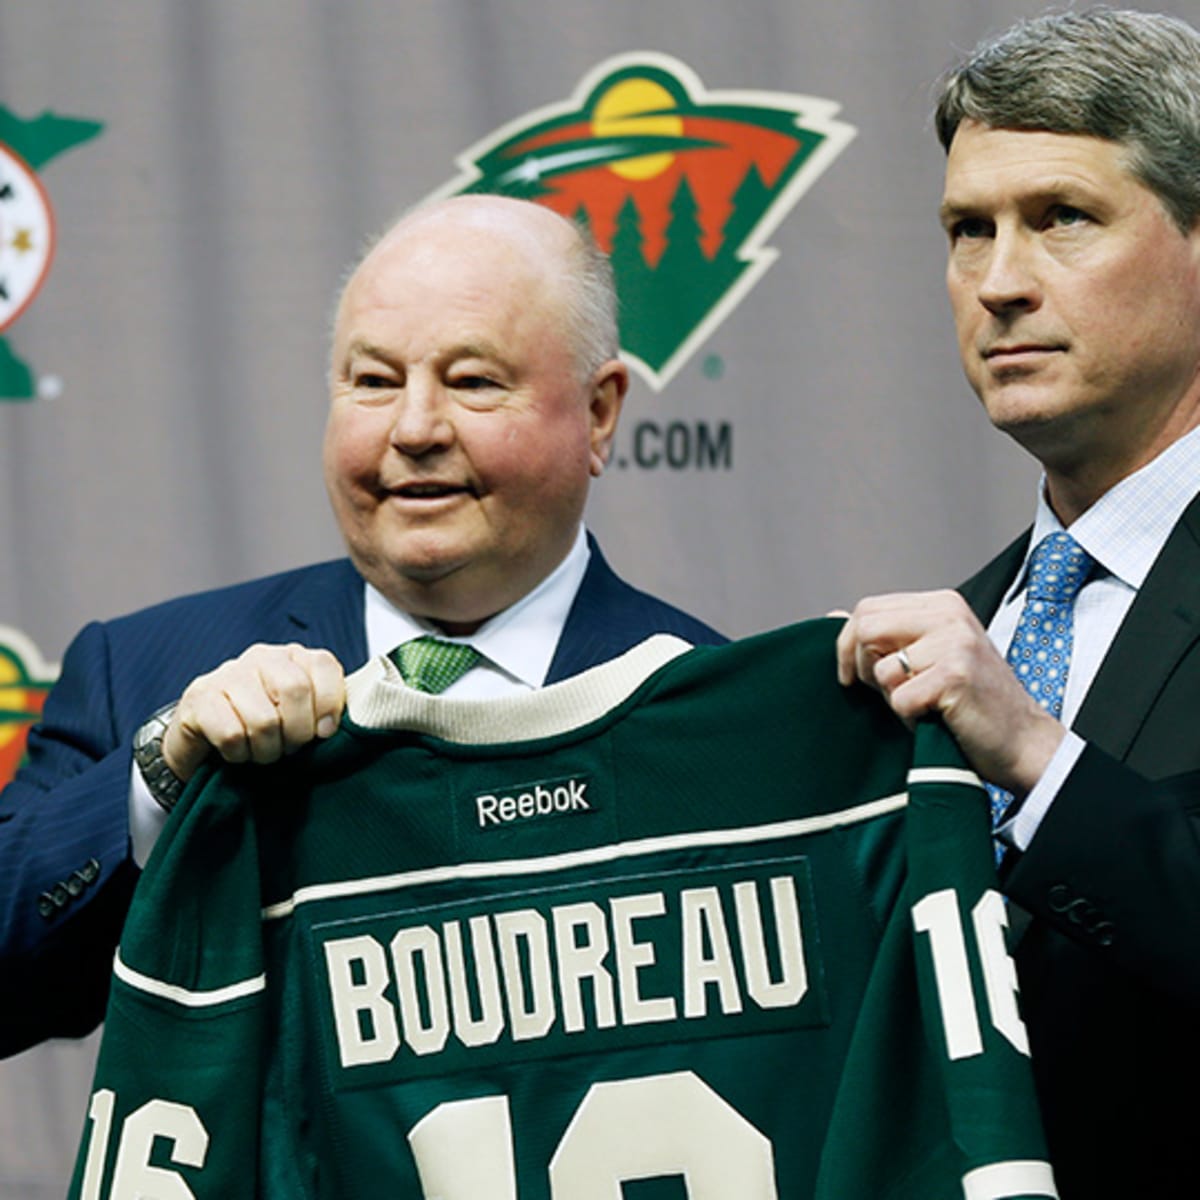 Minnesota Wild: Boudreau's odyssey comes full circle in St. Paul